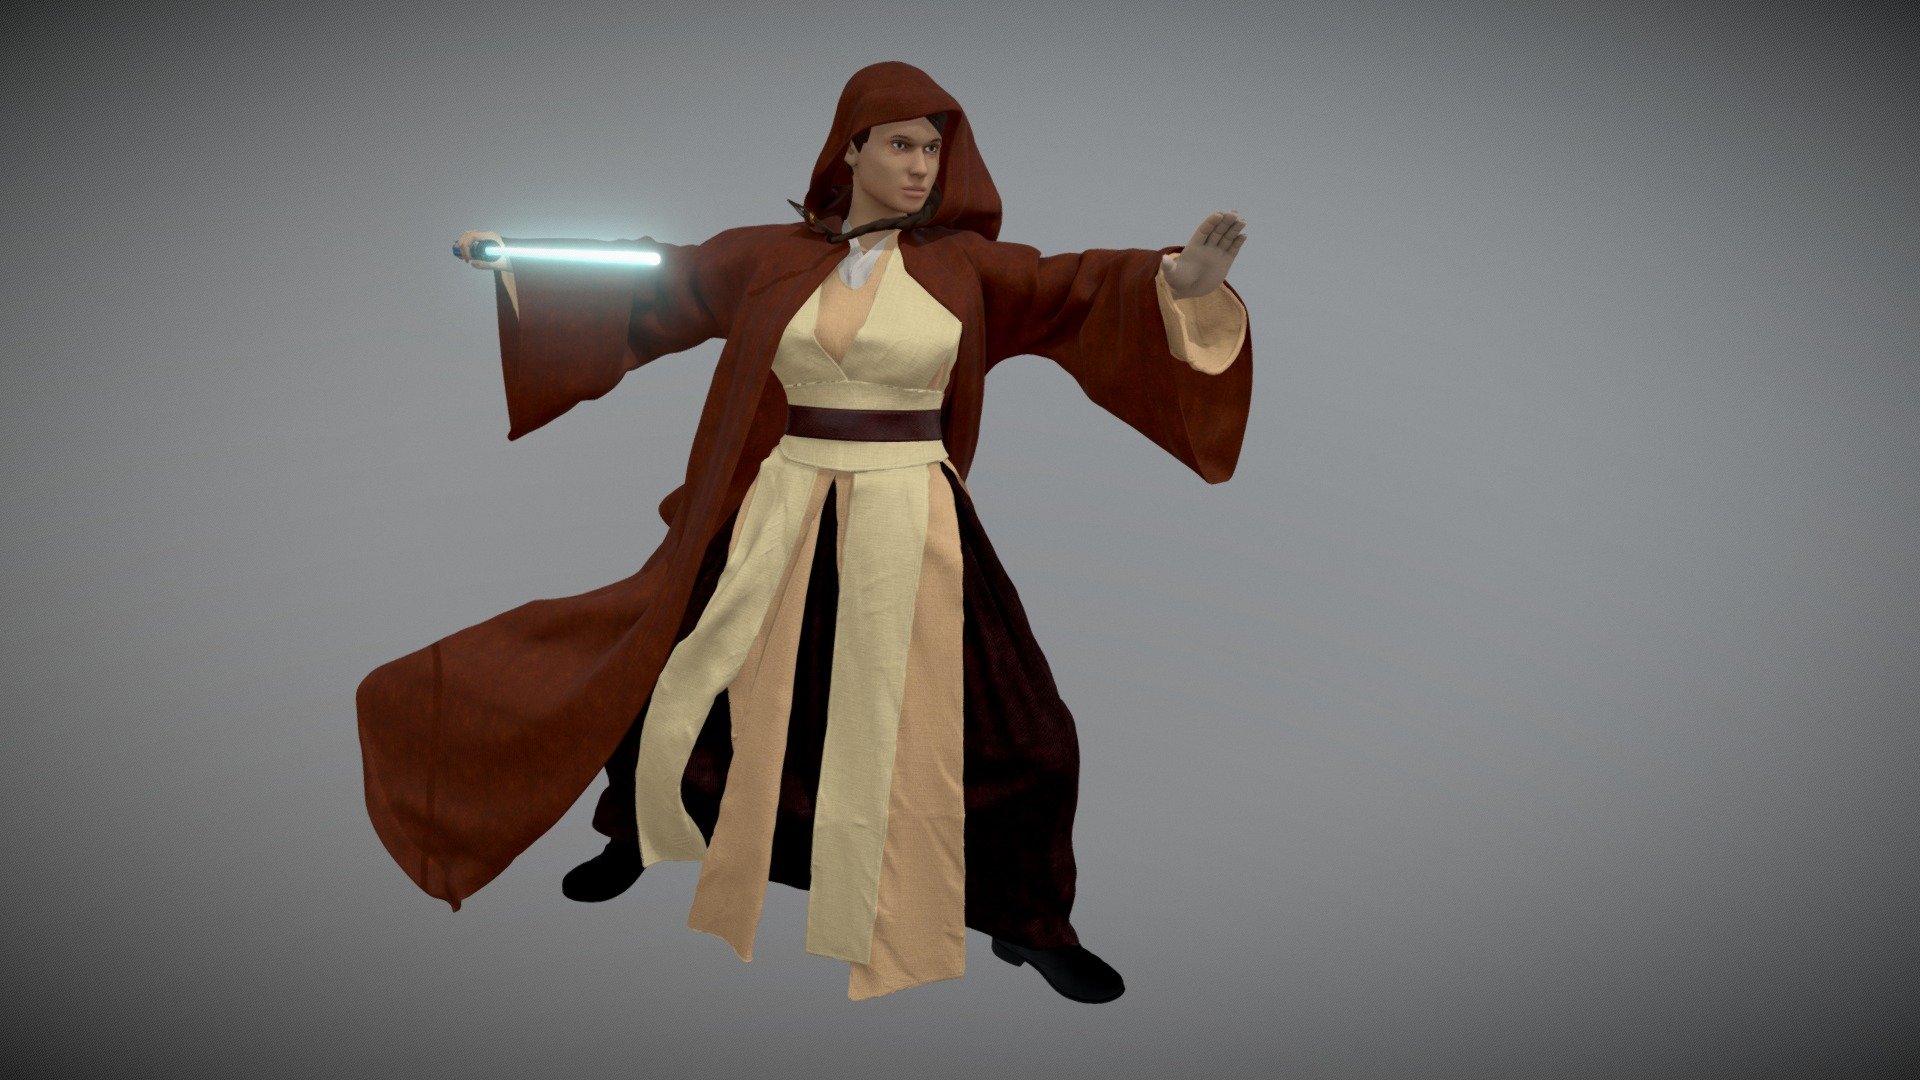 Jedi master character with clothing inspired by a Pinterest cosplay costume post. Part of a larger scene: https://www.artstation.com/artwork/L33V9A
Basemesh from MBlab 1.7, clothing modelled and simulated in Marvelous Designer, texturing in Substance Painter. 
I fixed the texturing of the eyes in Sketchfab now, some weird settings were required in the blending modes of the different eye layers. You live and learn 3d model